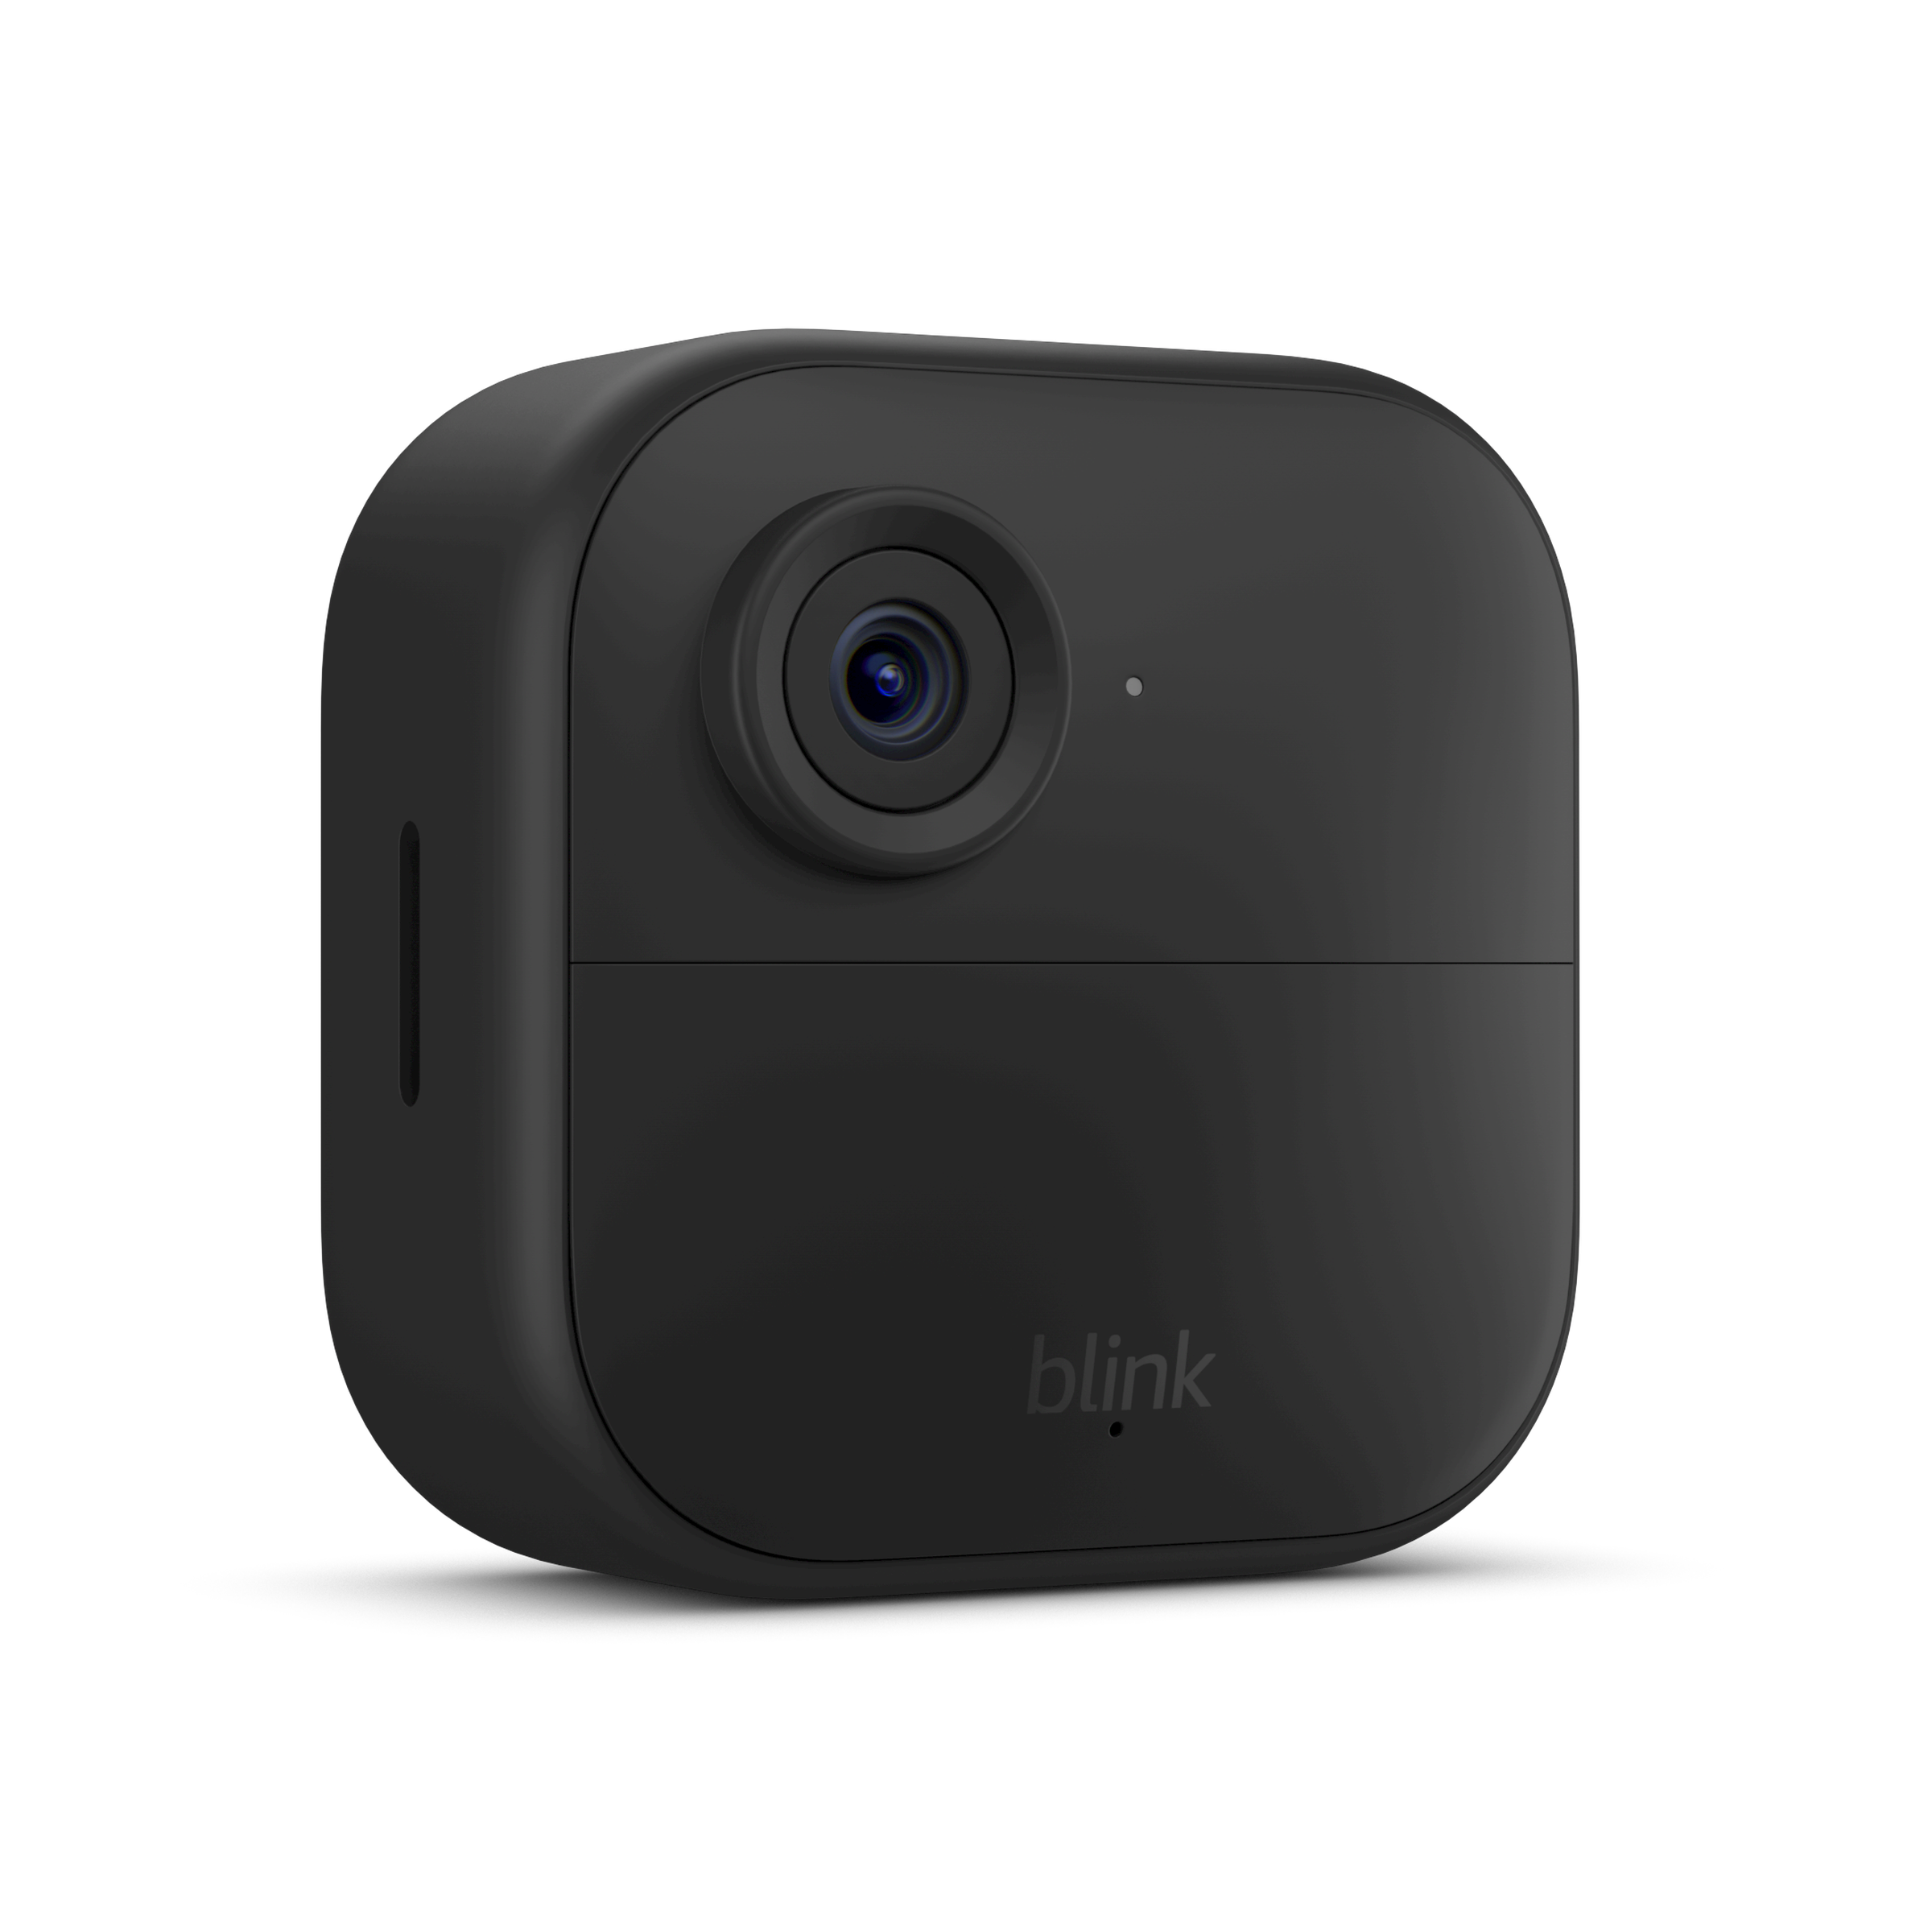 The new Blink camera has a sleeker look than previous versions.